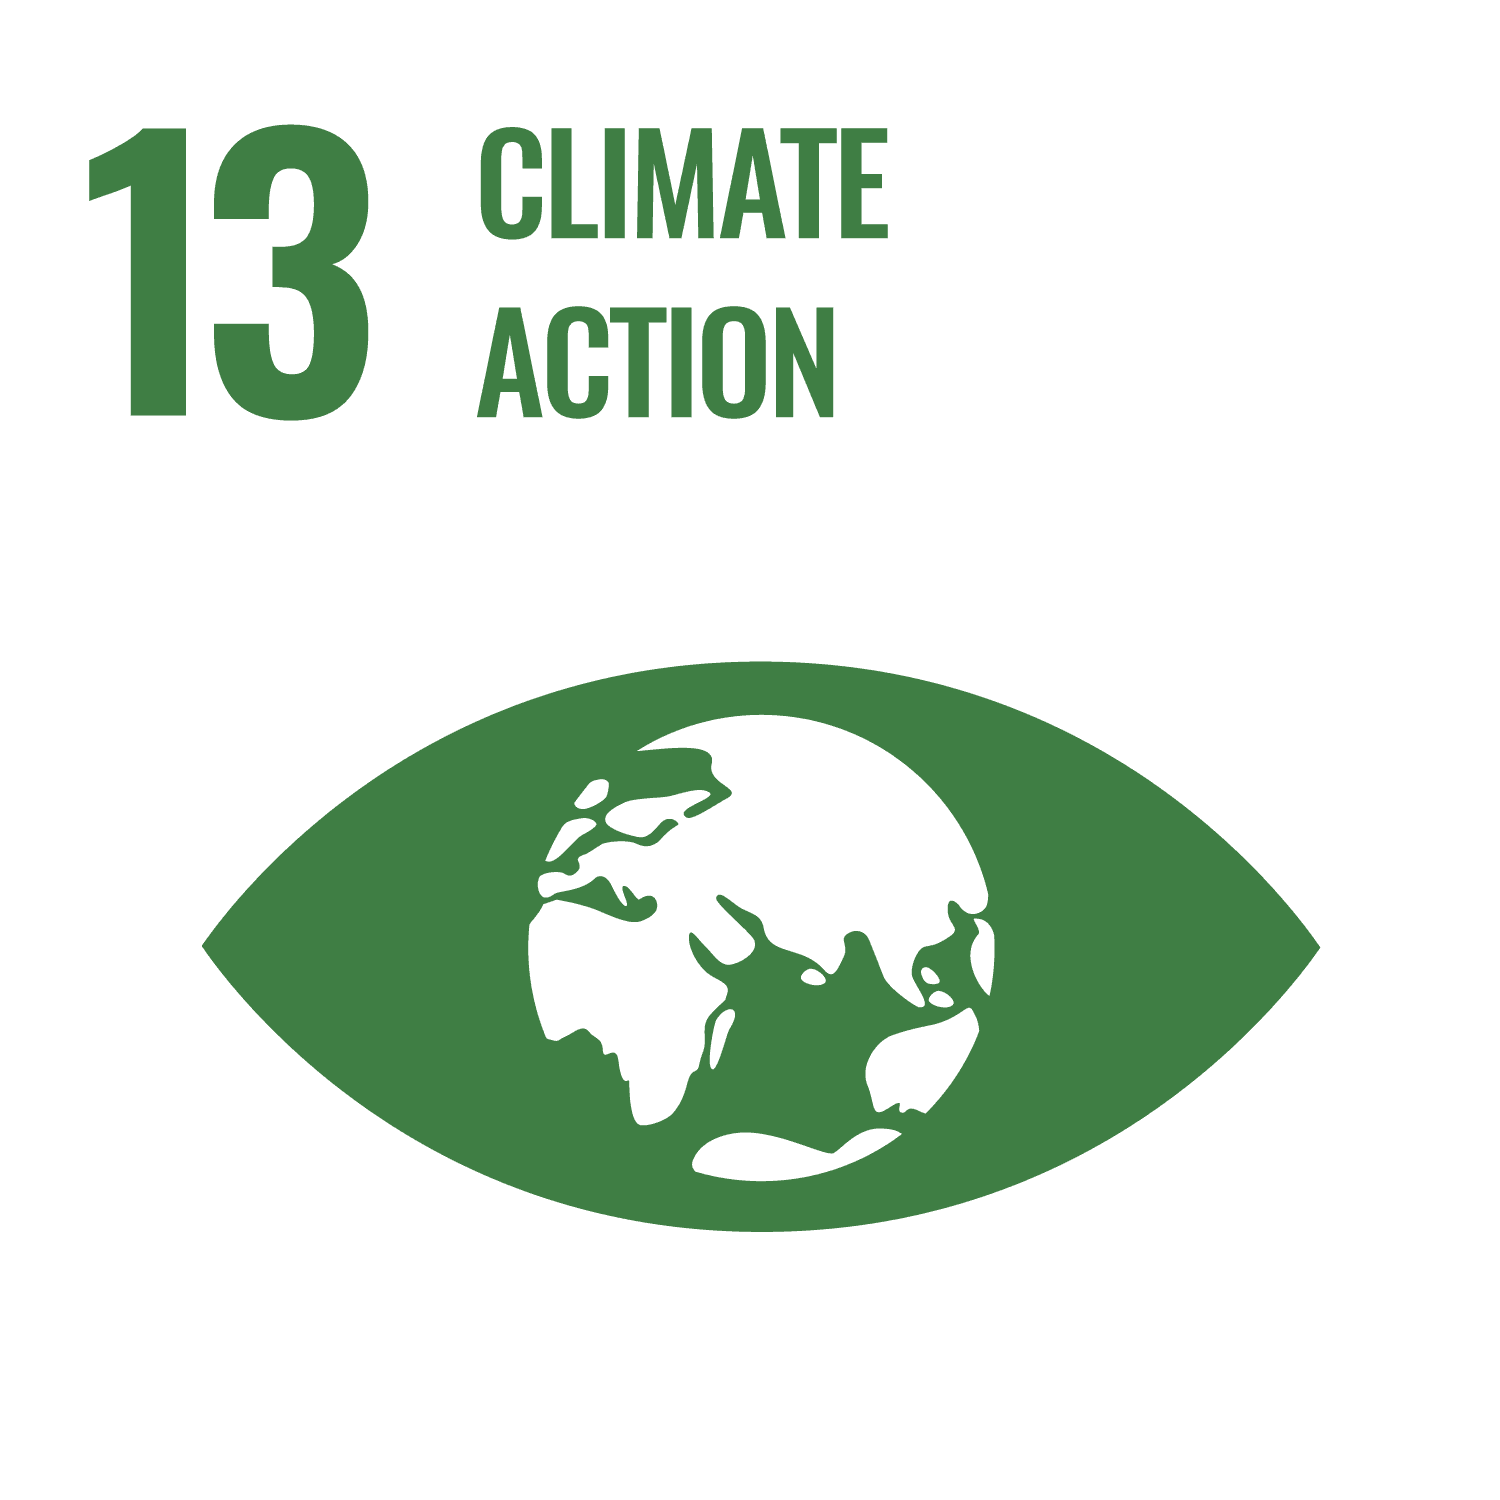 Goal 13, Climate action